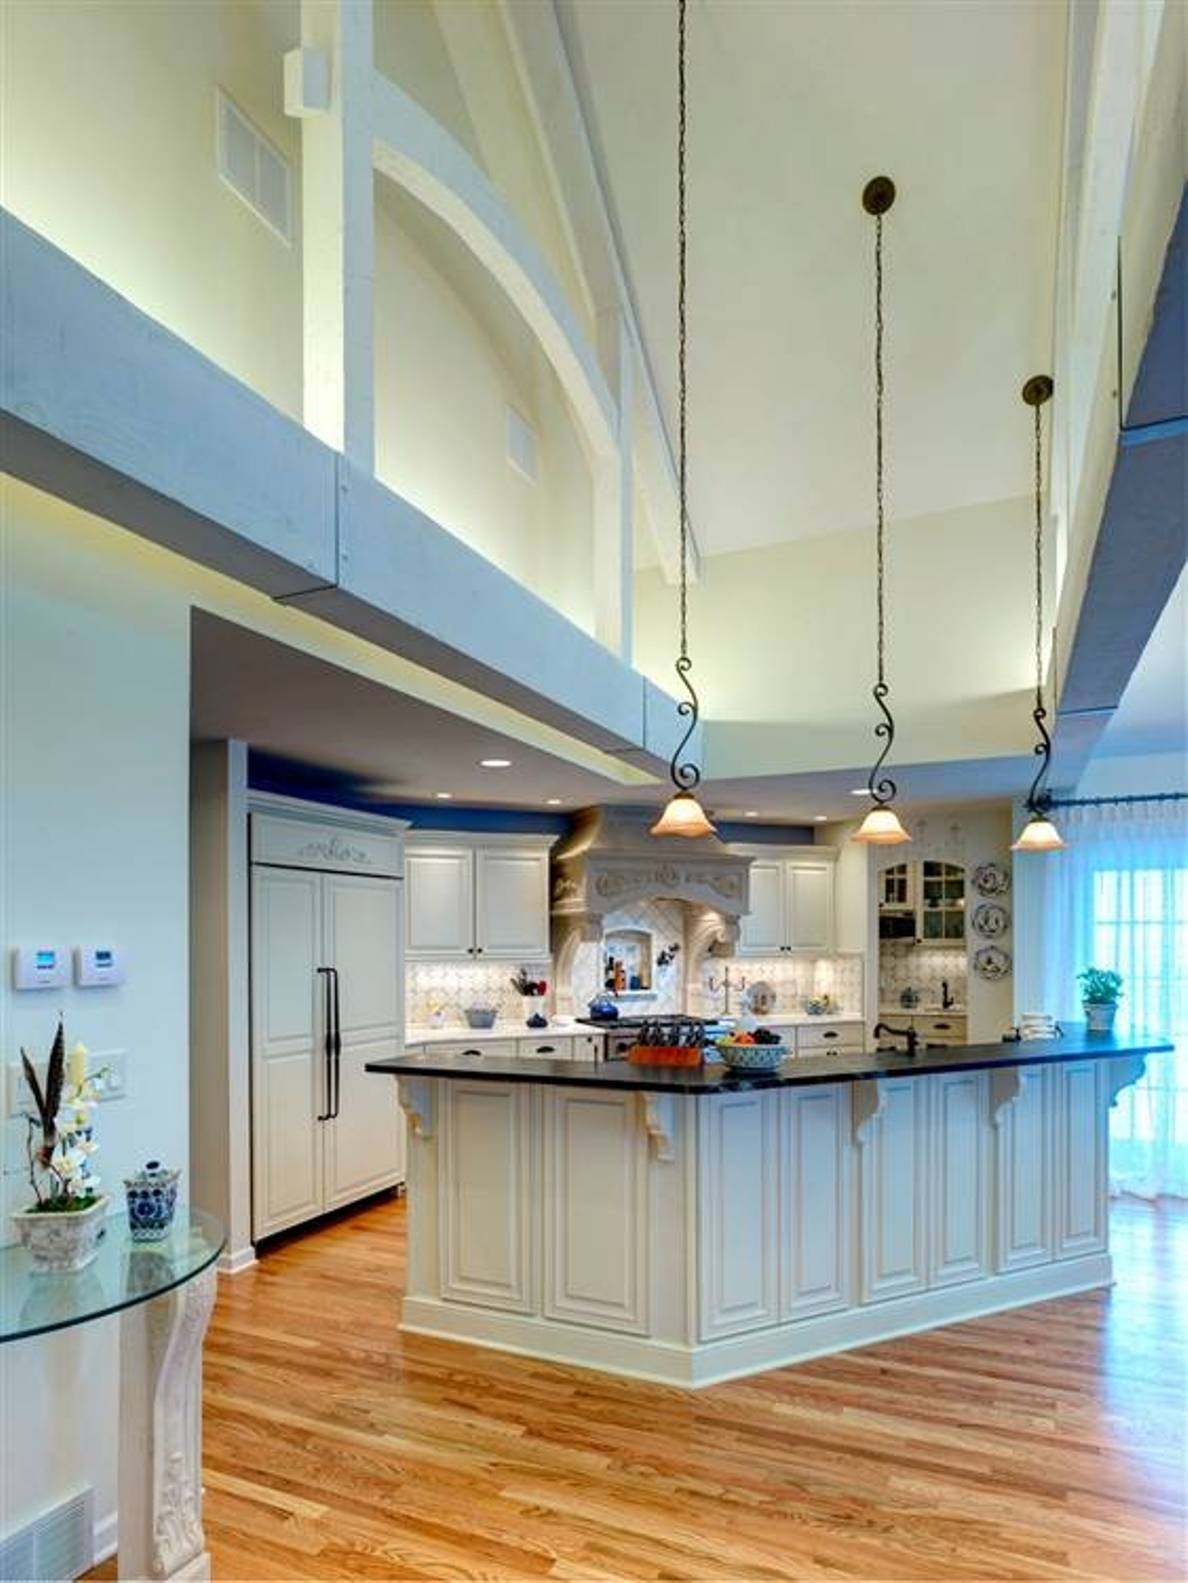 Permalink to Lights For High Ceilings Kitchen